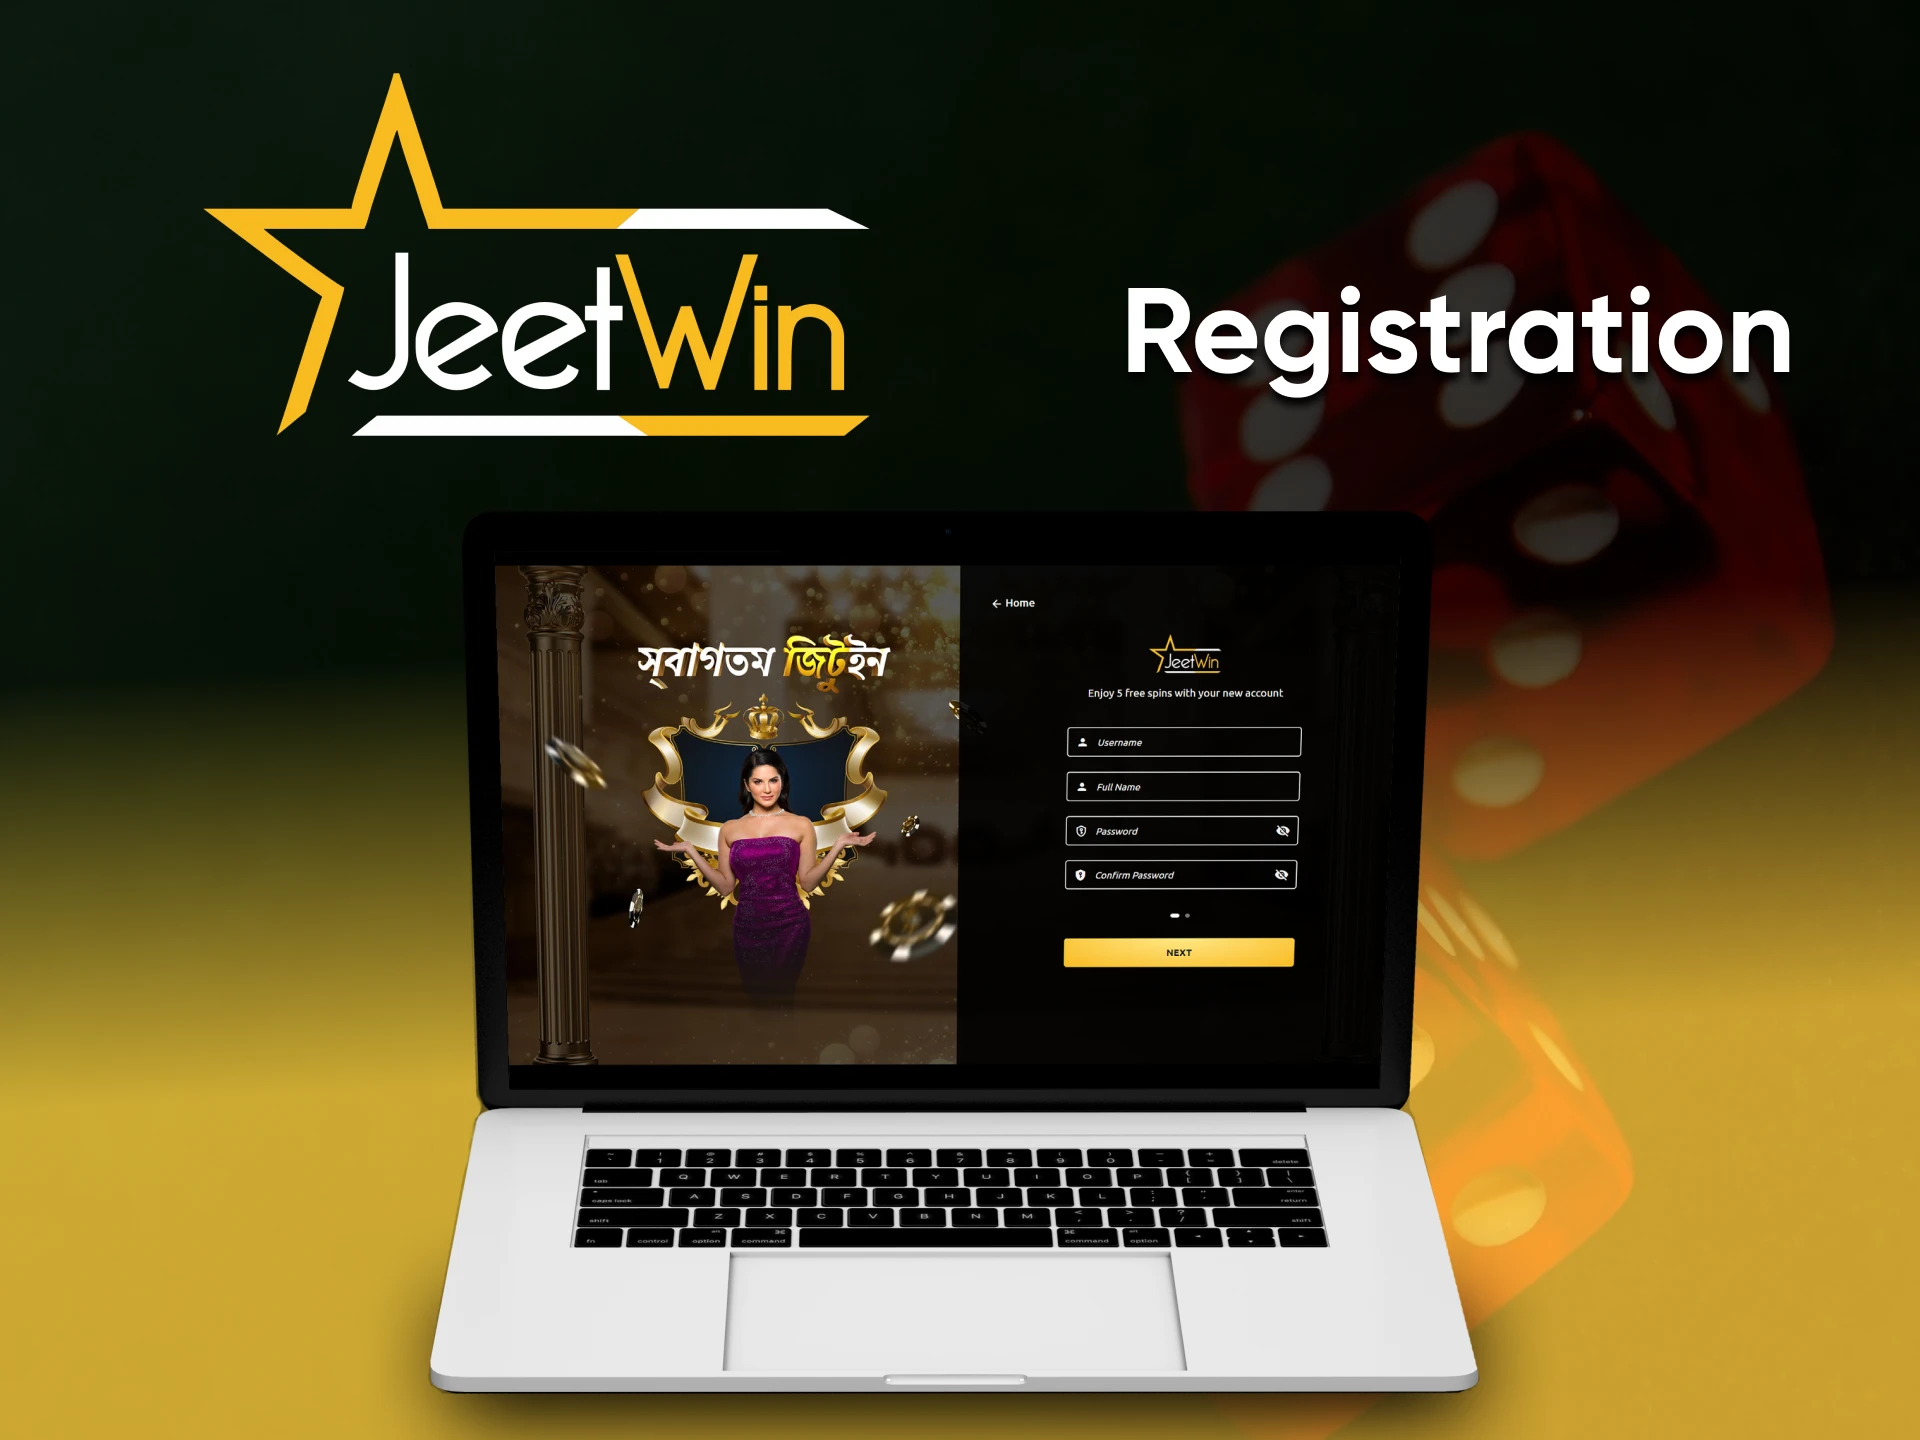 To play at Jeetwin Casino, you need to create an account.